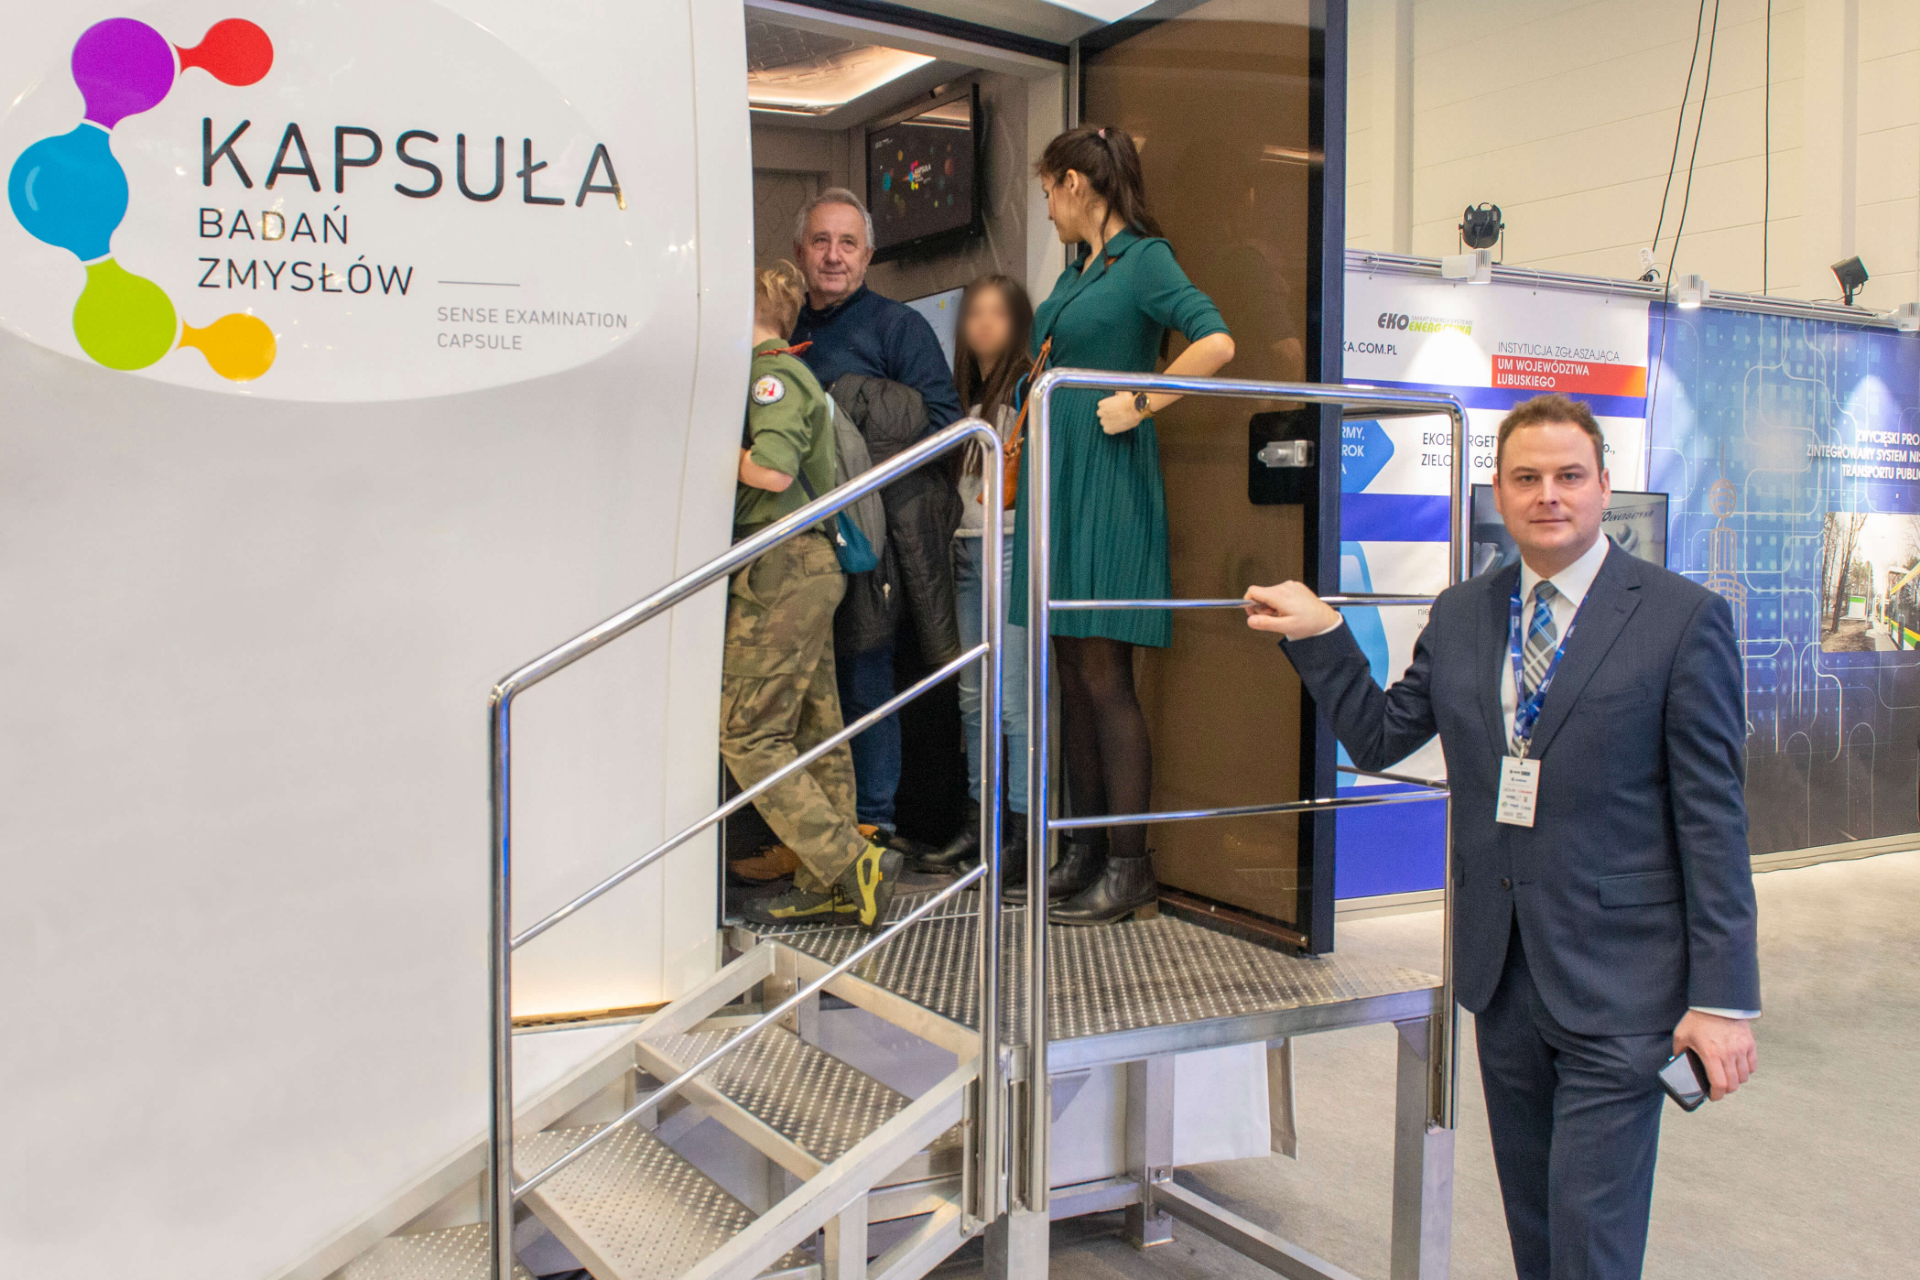 Paweł Doliński, M.Sc., stands in front of the Diagnostic Capsule, into which several people enter